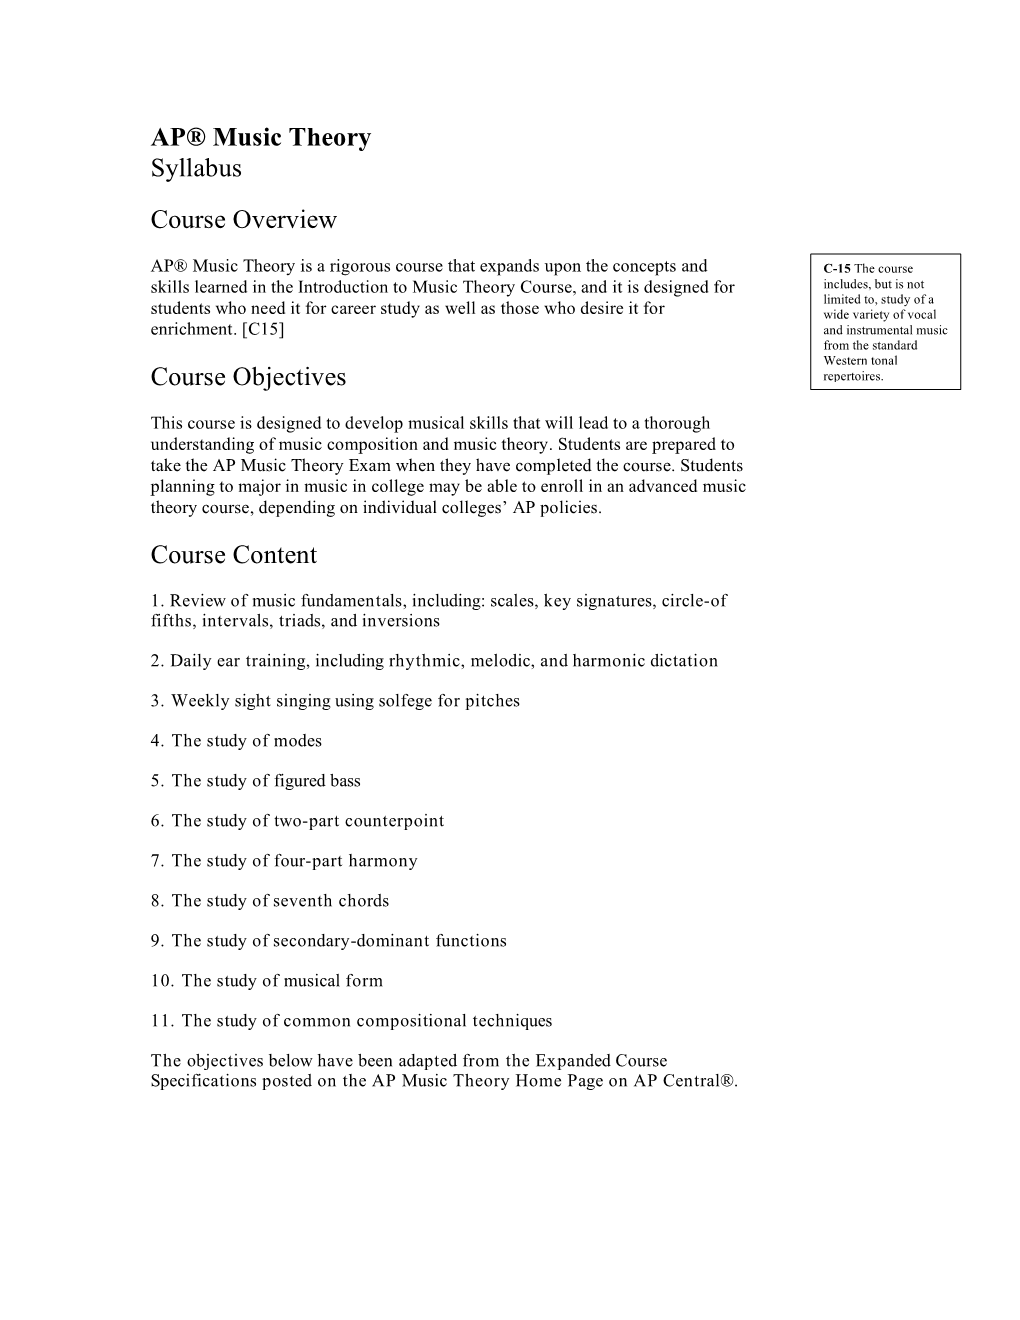 AP® Music Theory Syllabus Course Overview Course Objectives Course Content